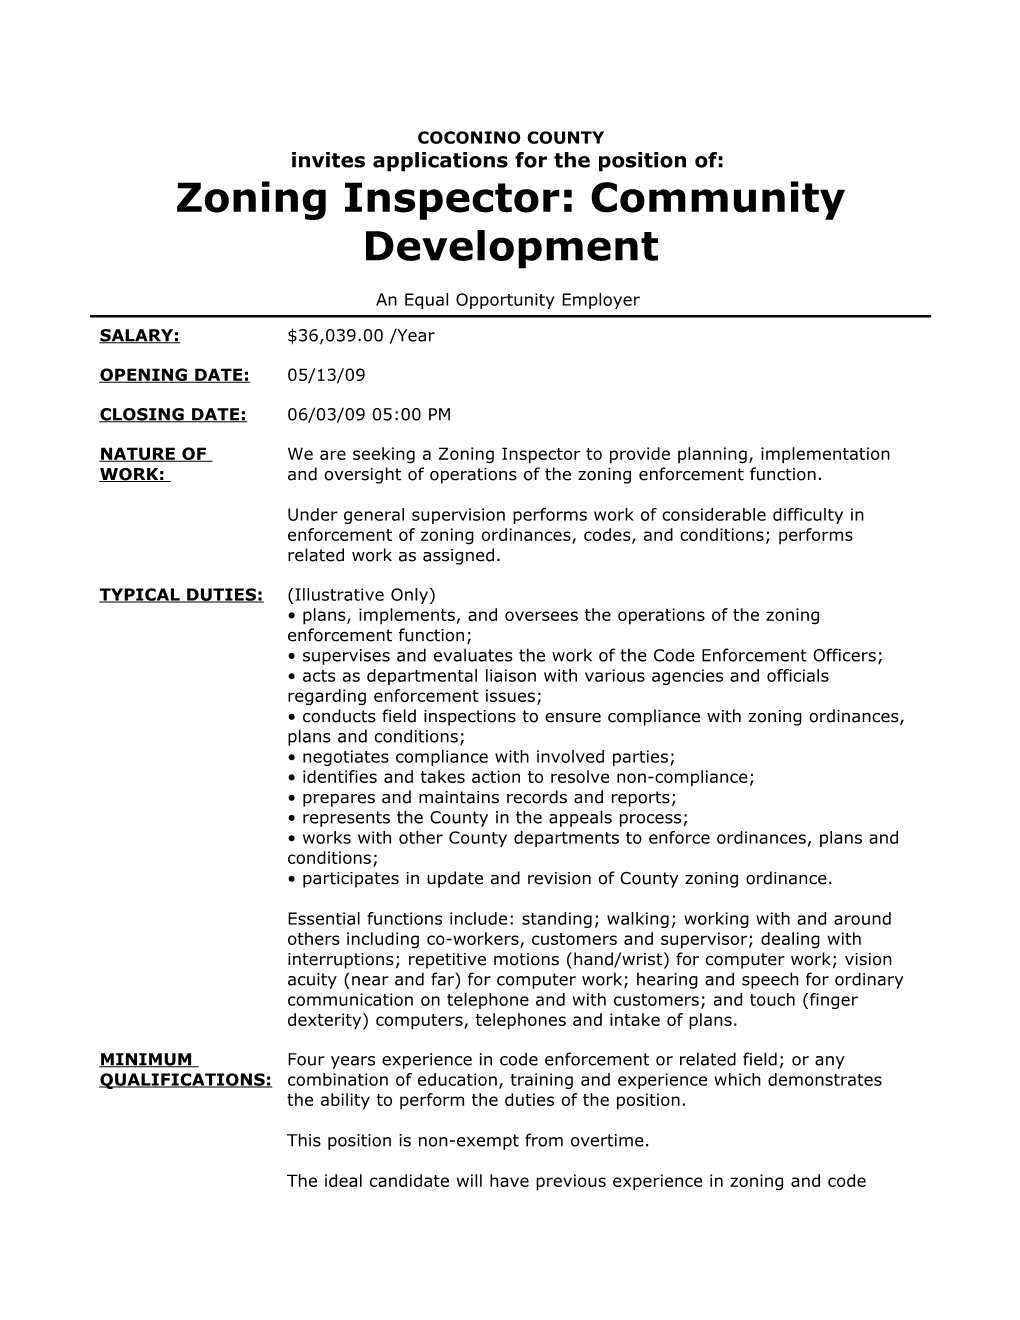 COCONINO Countyinvites Applications For The Position Of: Zoning Inspector: Community Developmentan Equal Opportunity Employer